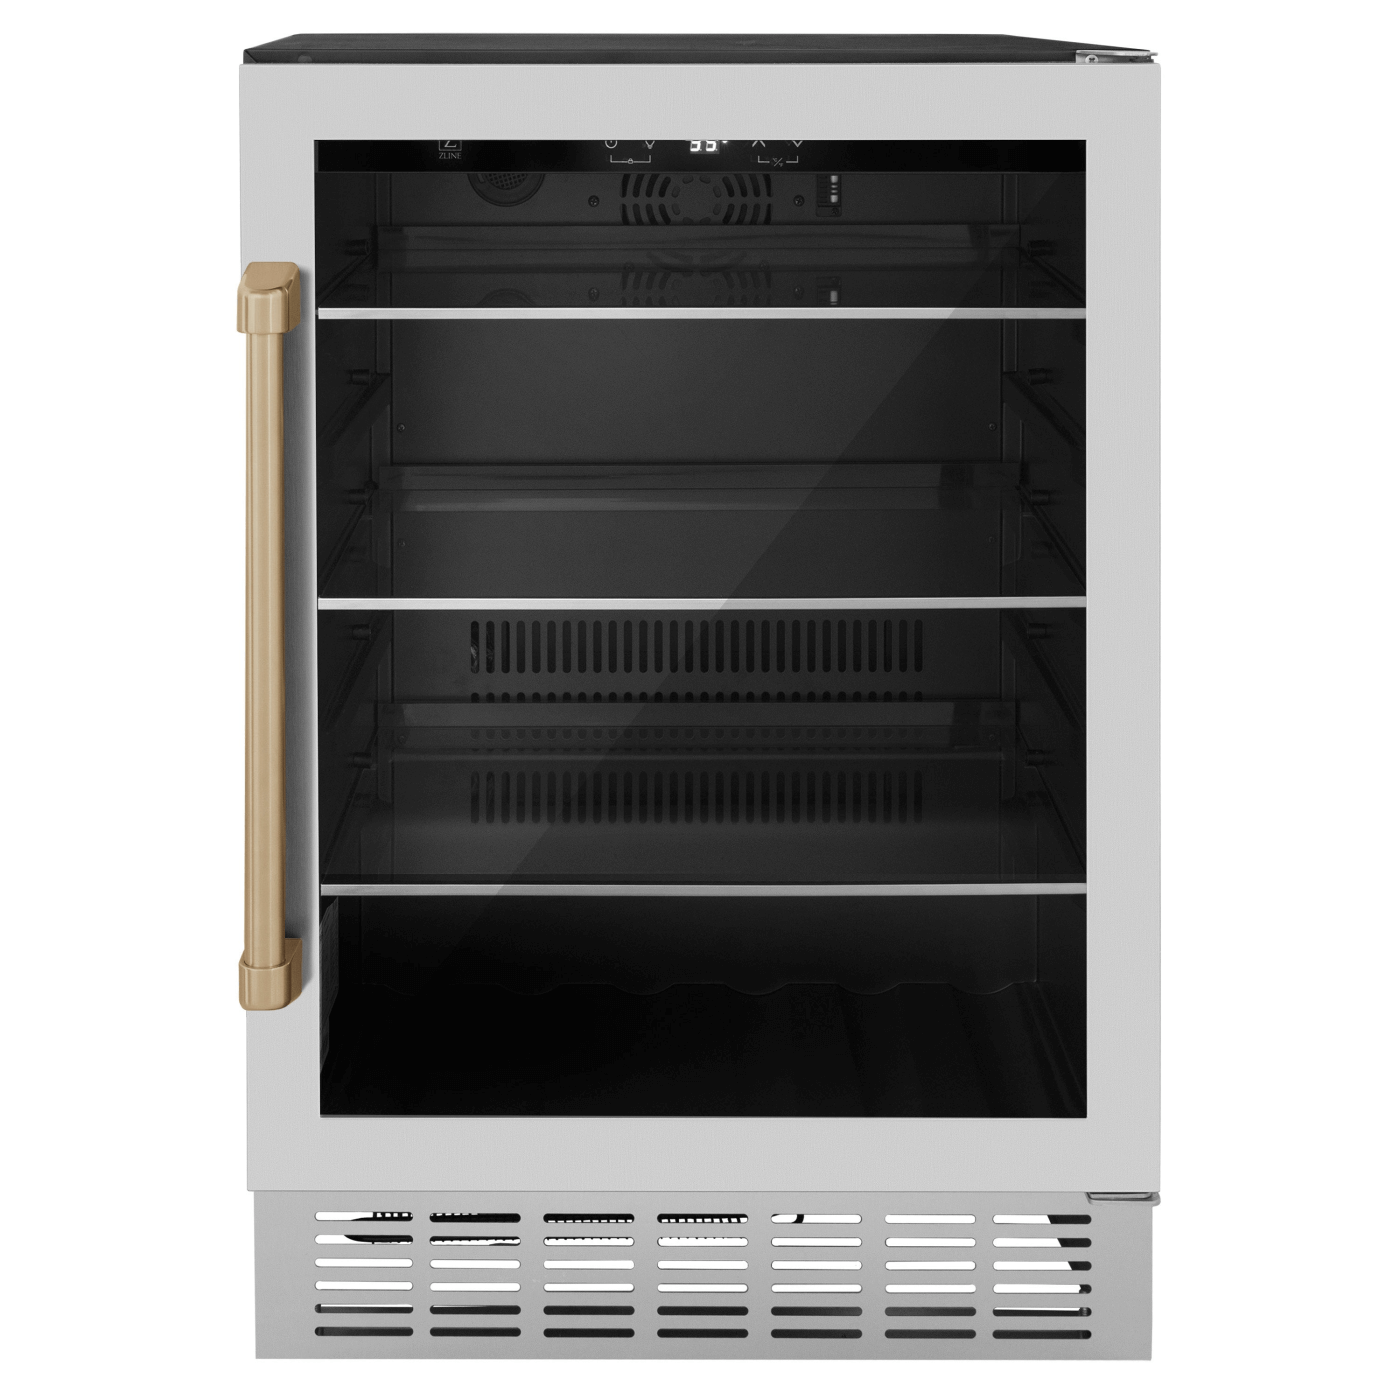  ZLINE 24 In. Monument Dual Zone 44-Bottle Wine Cooler in Stainless Steel with Wood Shelf (RWV-UD-24)